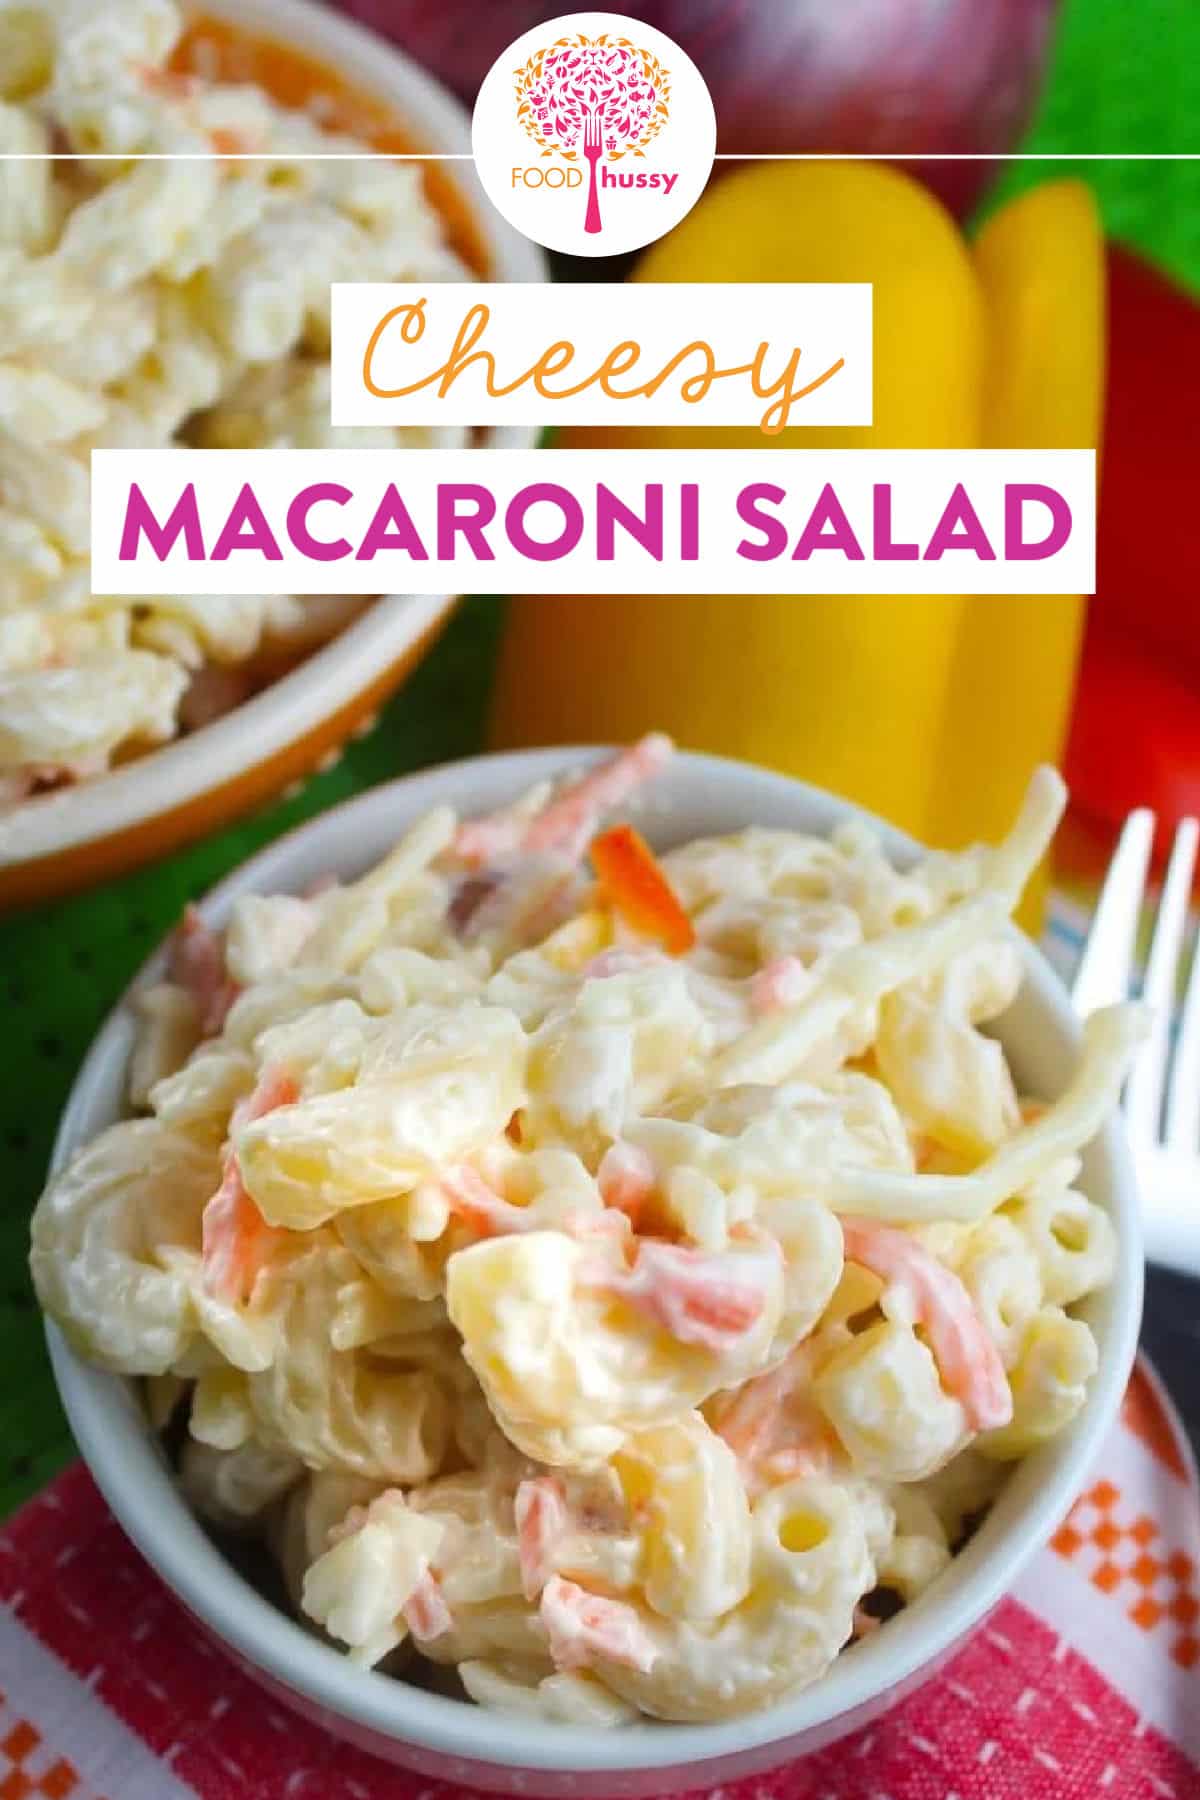 This Cheesy Macaroni Salad is going to be a sure fire hit at your dinner table or the next potluck! No matter what time of year - quick and easy side dishes are always needed! via @foodhussy